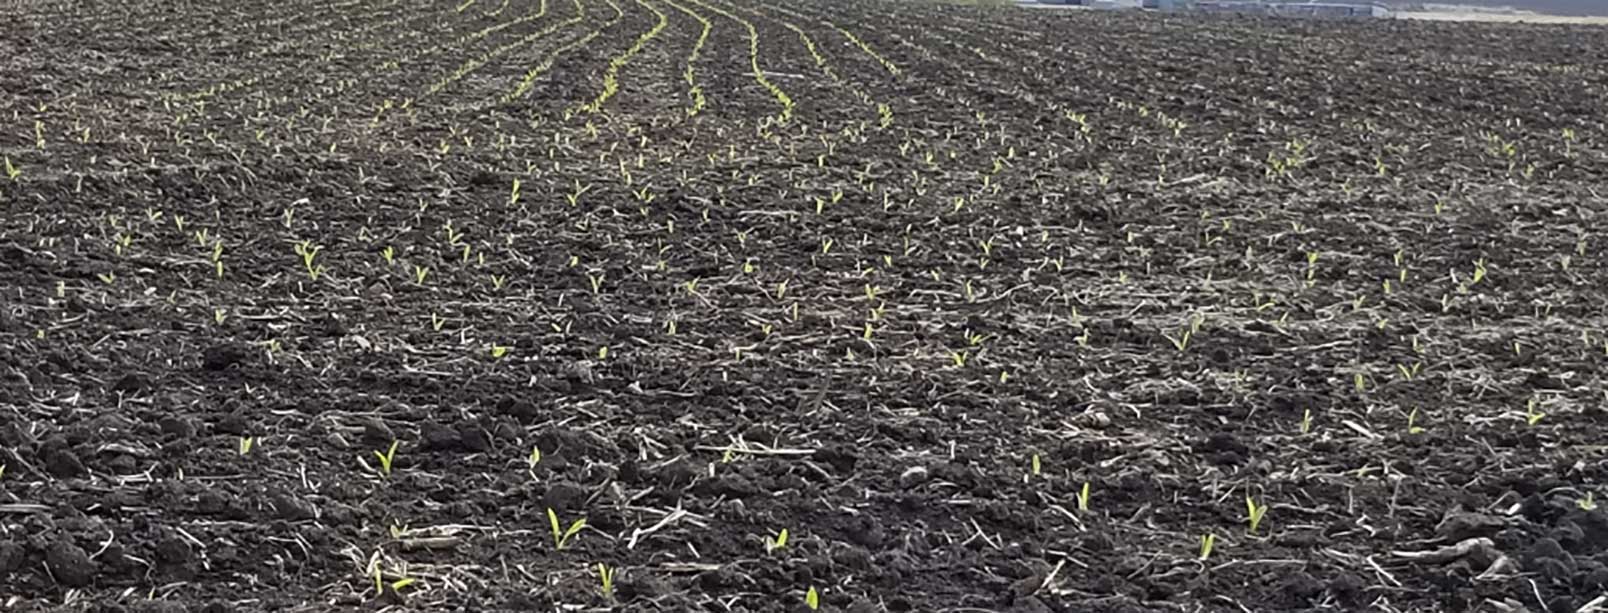 Young corn plants emerging in a field during early spring.